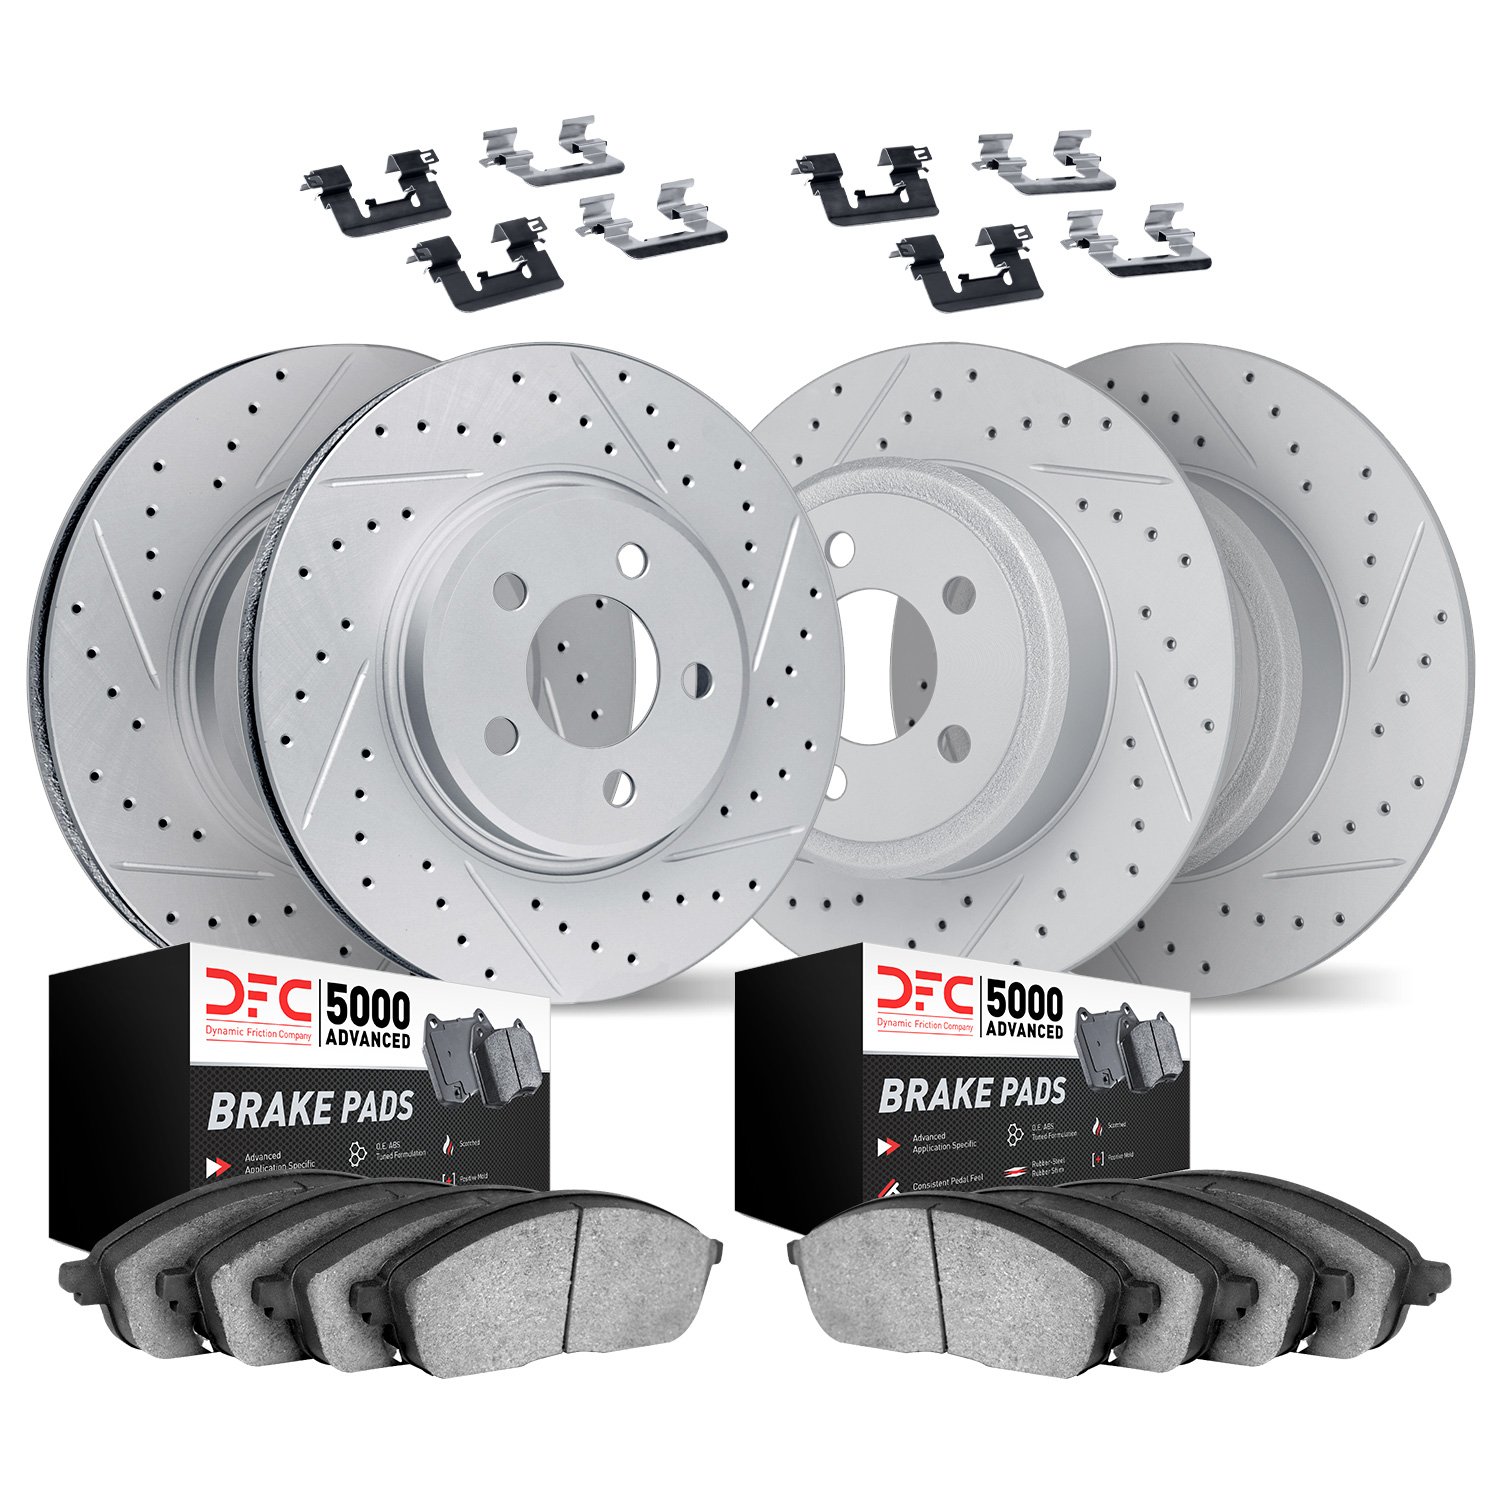 2514-39017 Geoperformance Drilled/Slotted Rotors w/5000 Advanced Brake Pads Kit & Hardware, 2015-2016 Mopar, Position: Front and